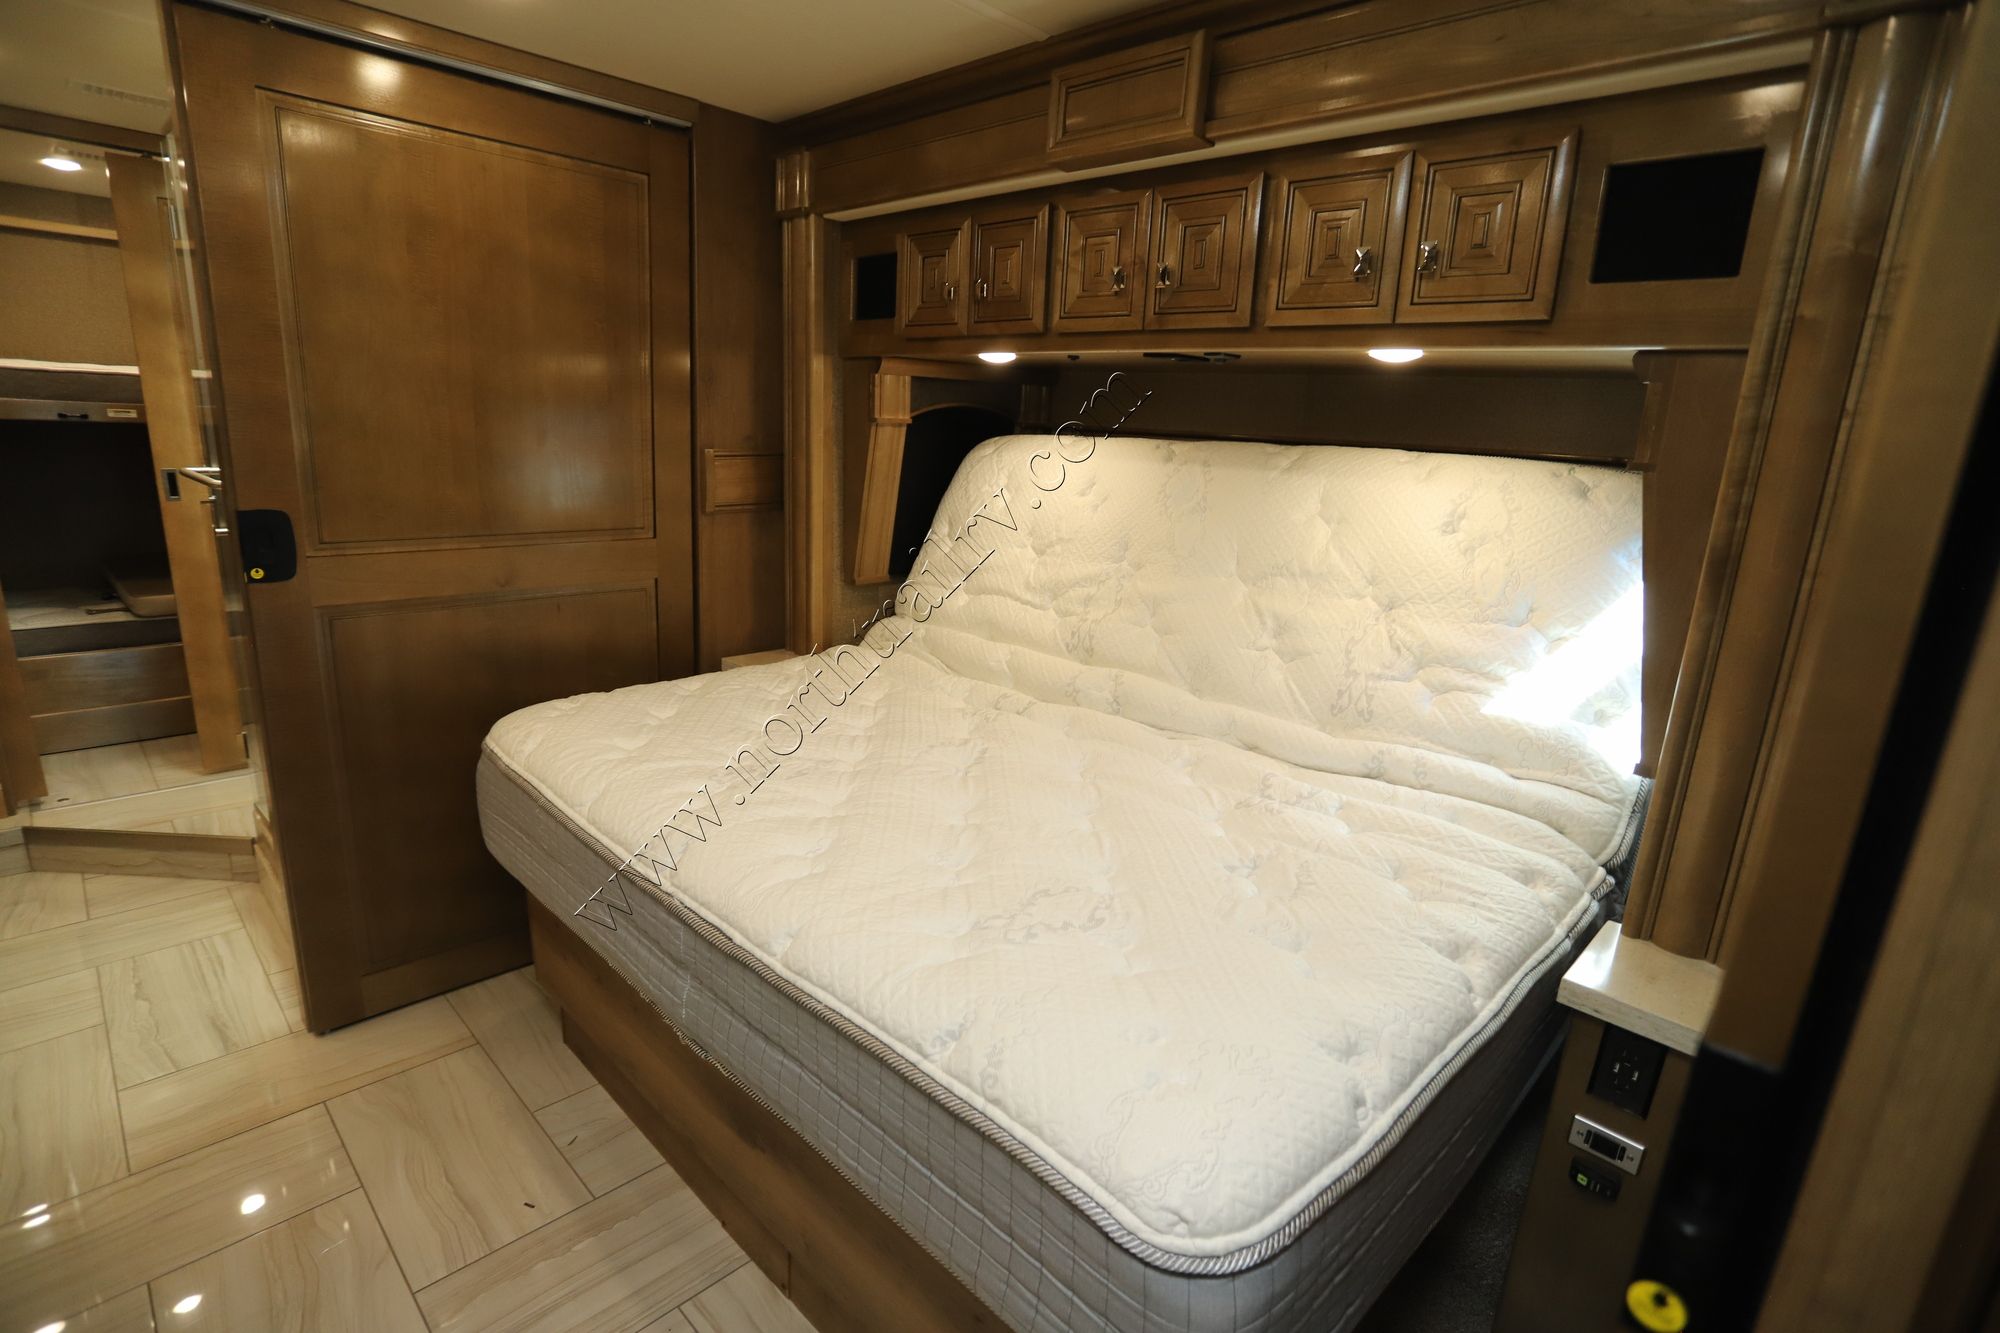 Used 2019 Fleetwood Discovery Lxe 44B Class A  For Sale